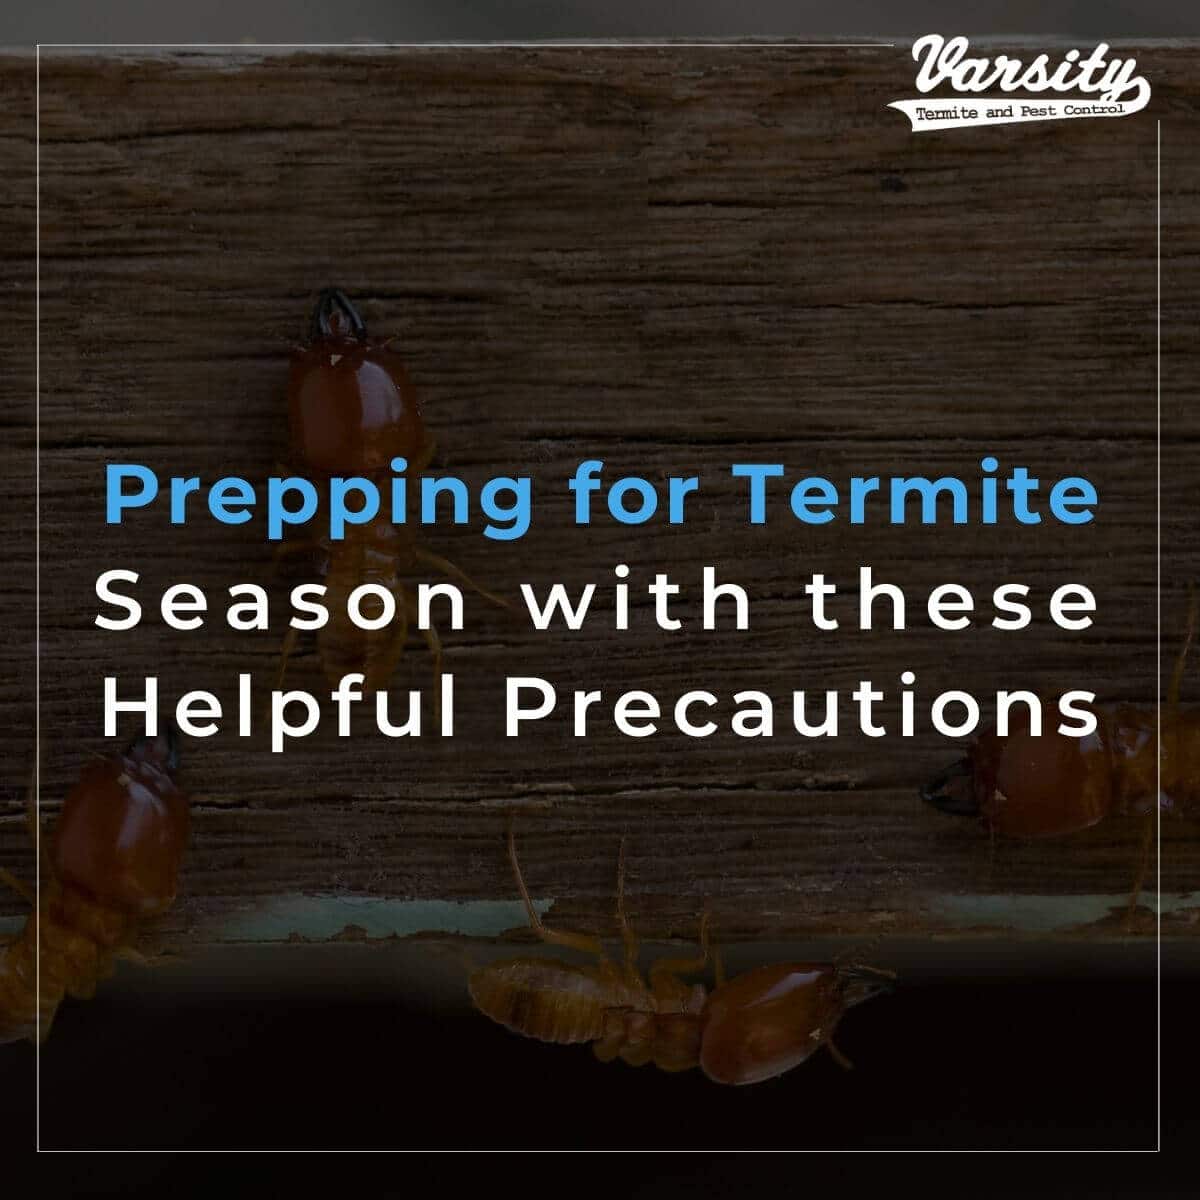 Prepping for Termite Season with these Helpful Precautions